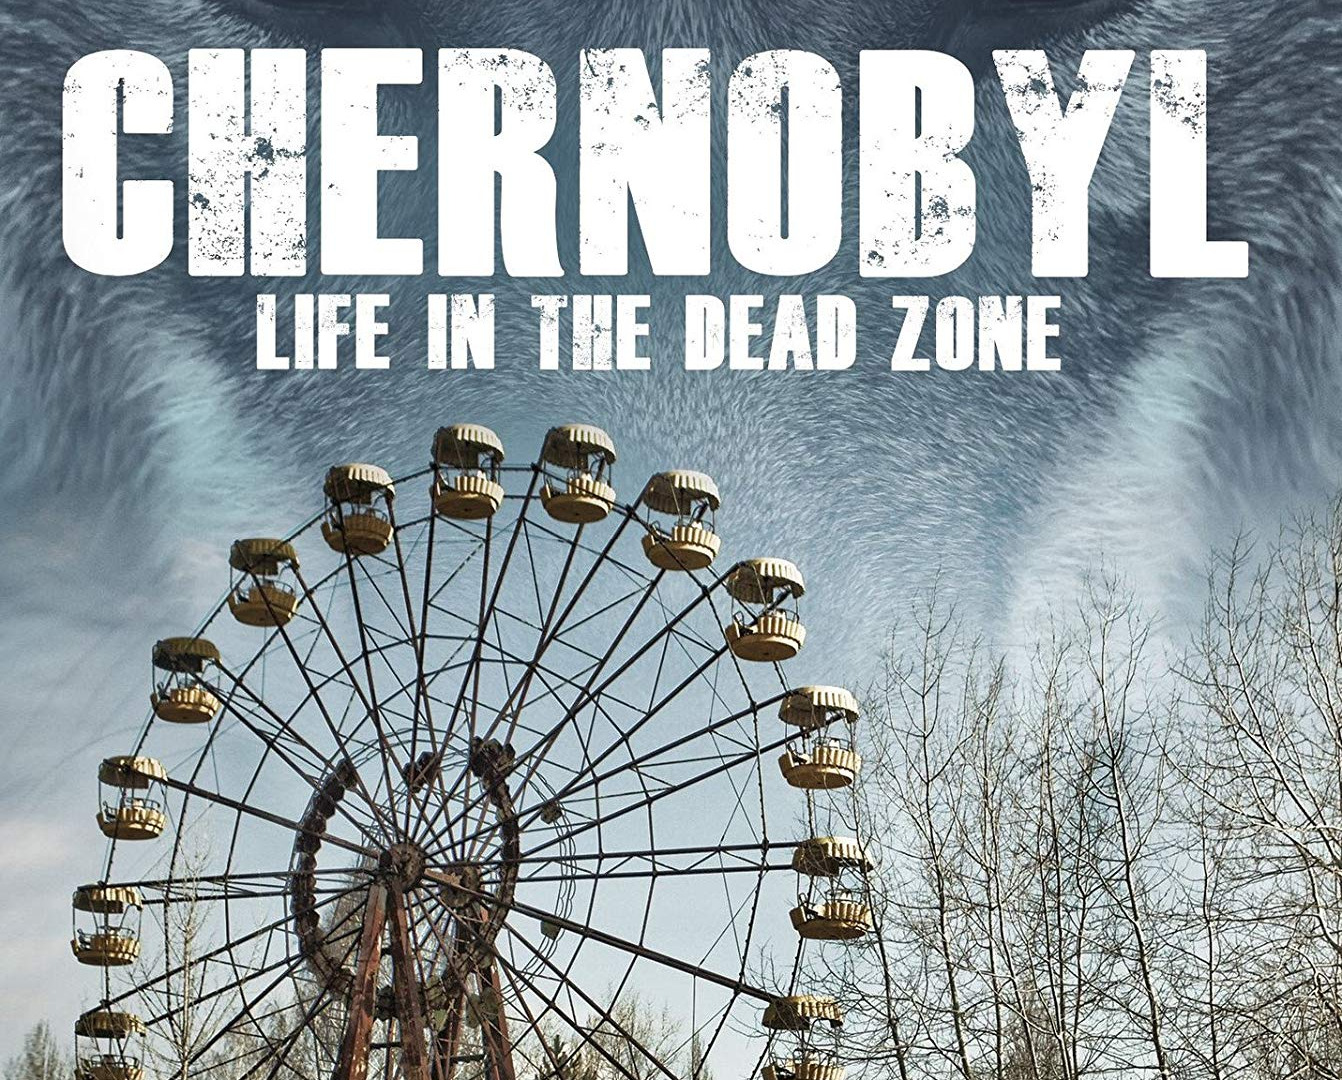 Show Chernobyl: Life in the Dead Zone